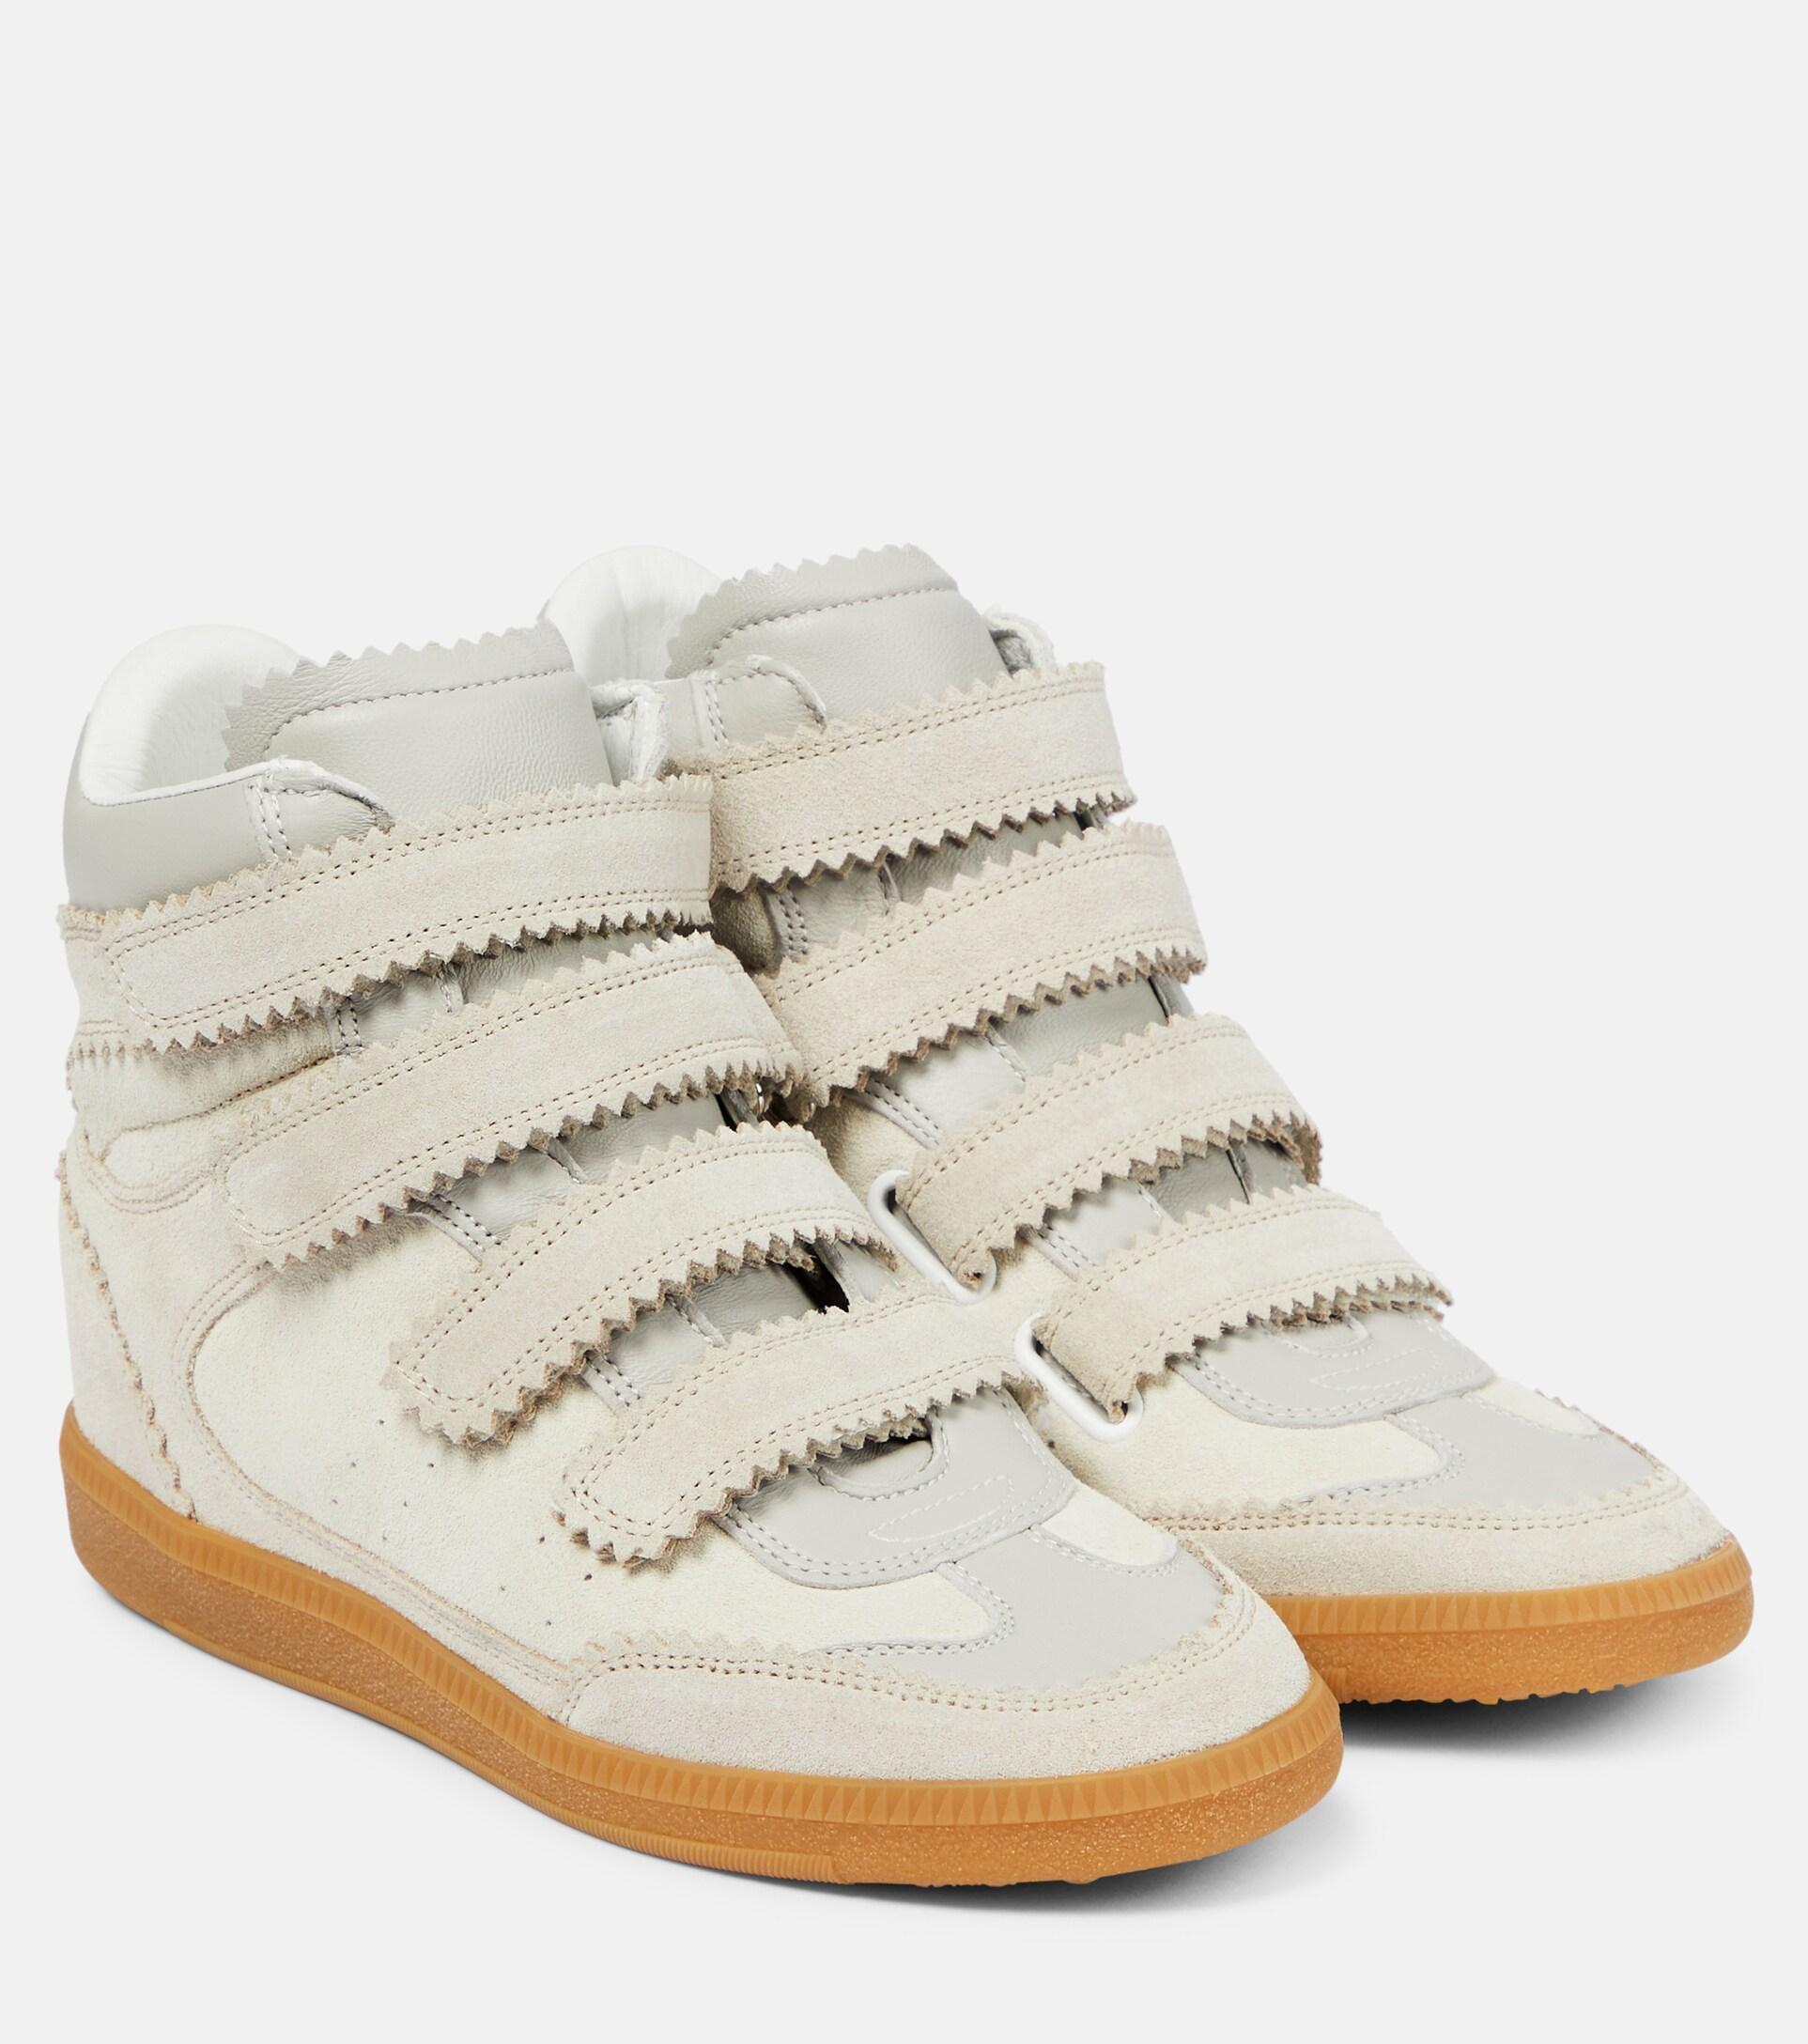 Profit forgænger Beskrive Isabel Marant Bilsy Suede High-top Sneakers in White | Lyst